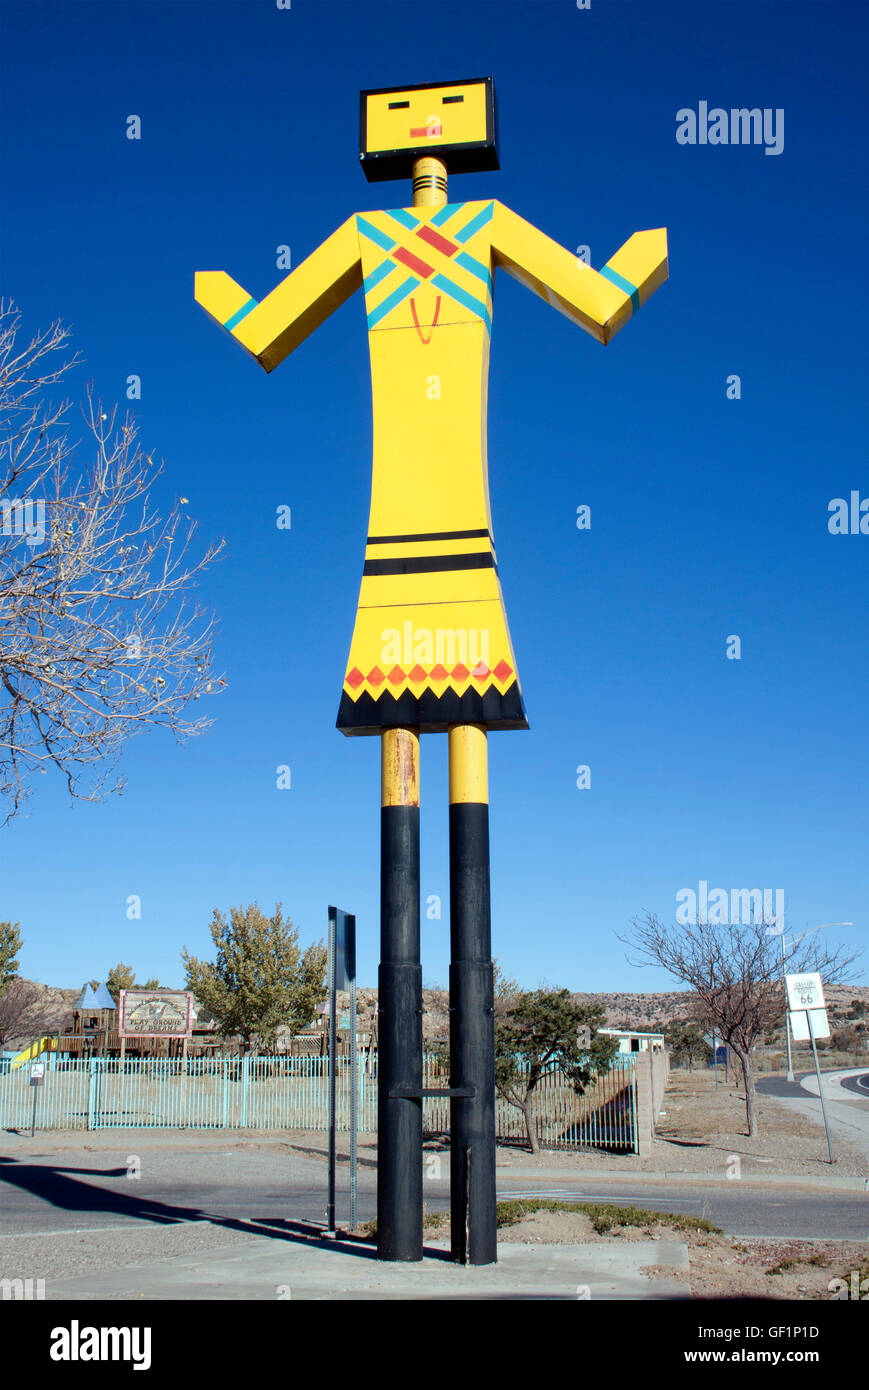 Giant Kachina Doll in Gallup New Mexico Stock Photo